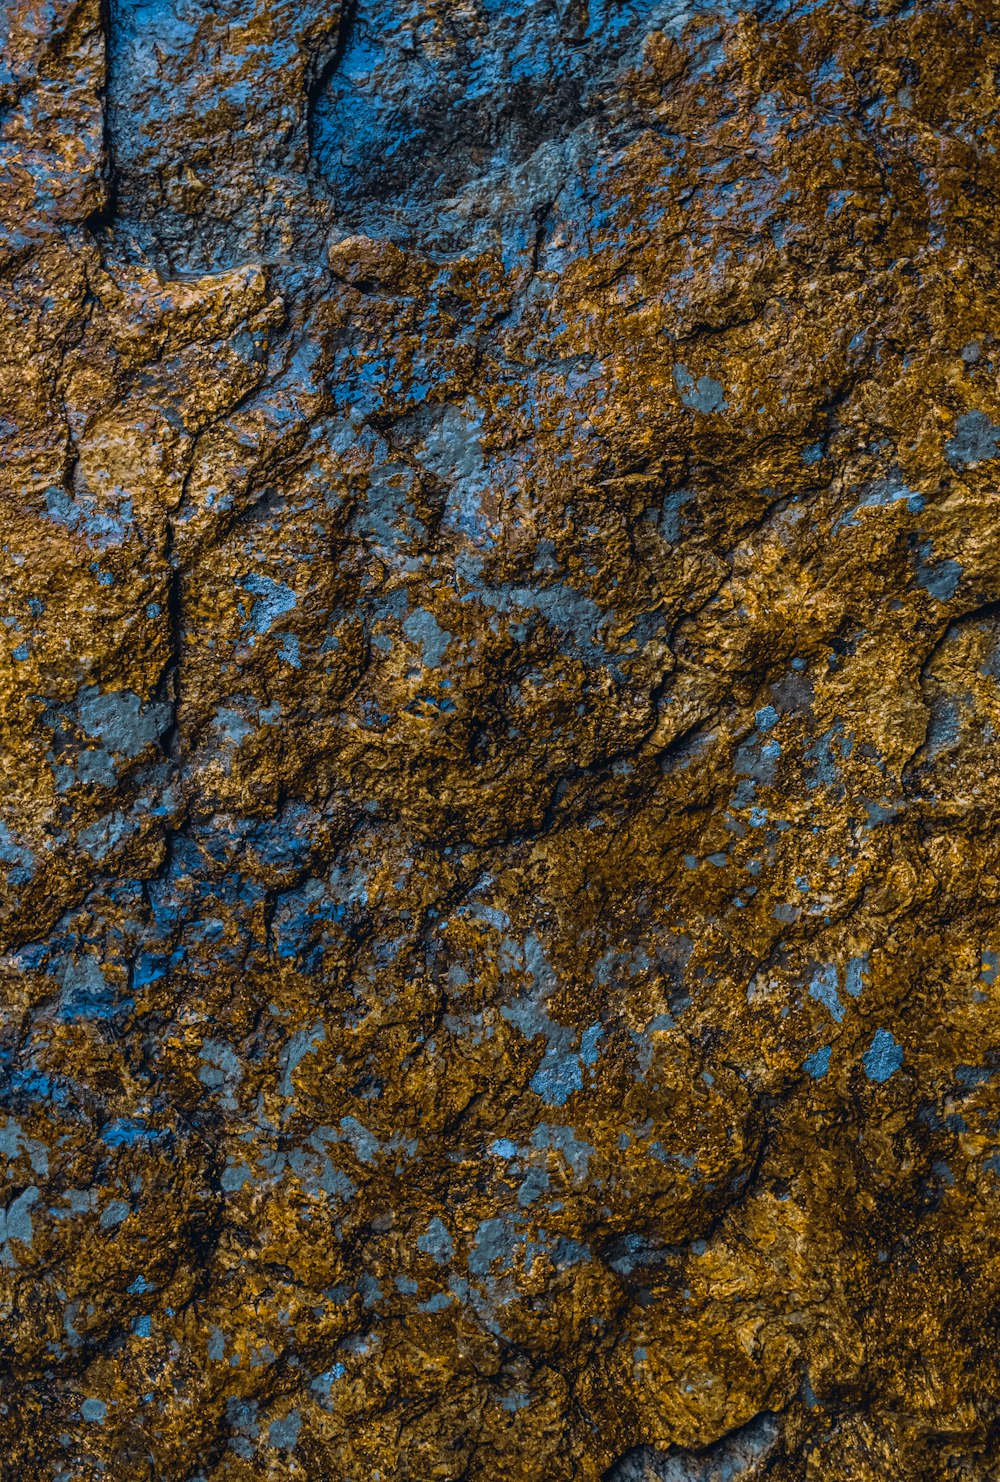 a close up of a rock face with a blue sky in the background